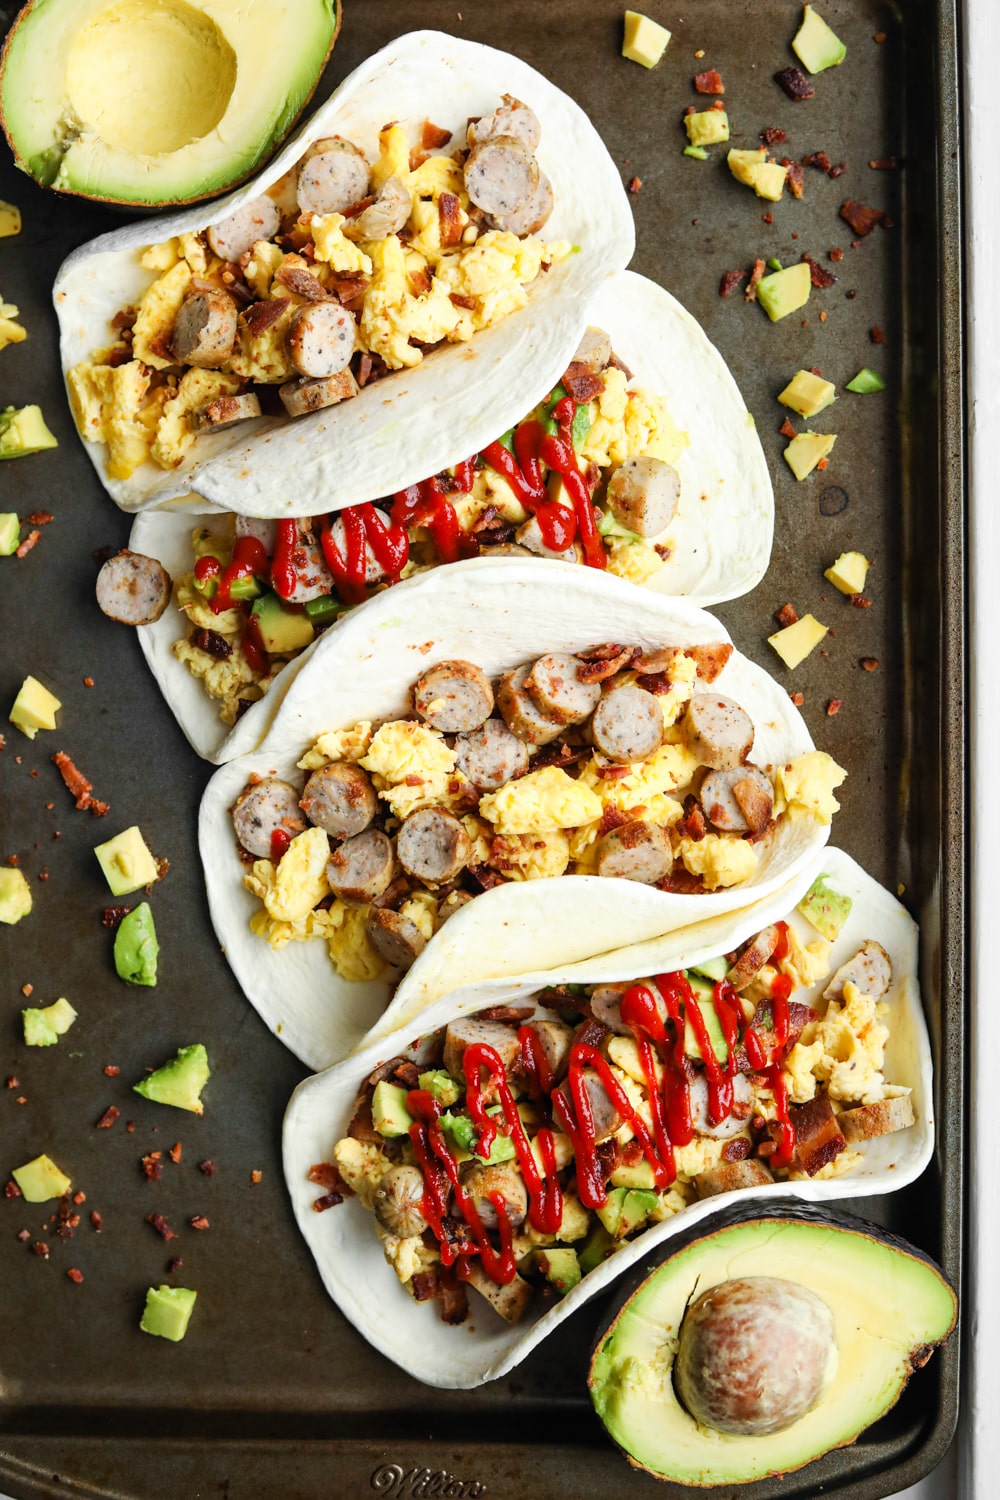 Breakfast tacos on a baking sheet. The tacos are filled with eggs, bacon, sausage. Some of the tacos have avocado and Sriracha on them as well.